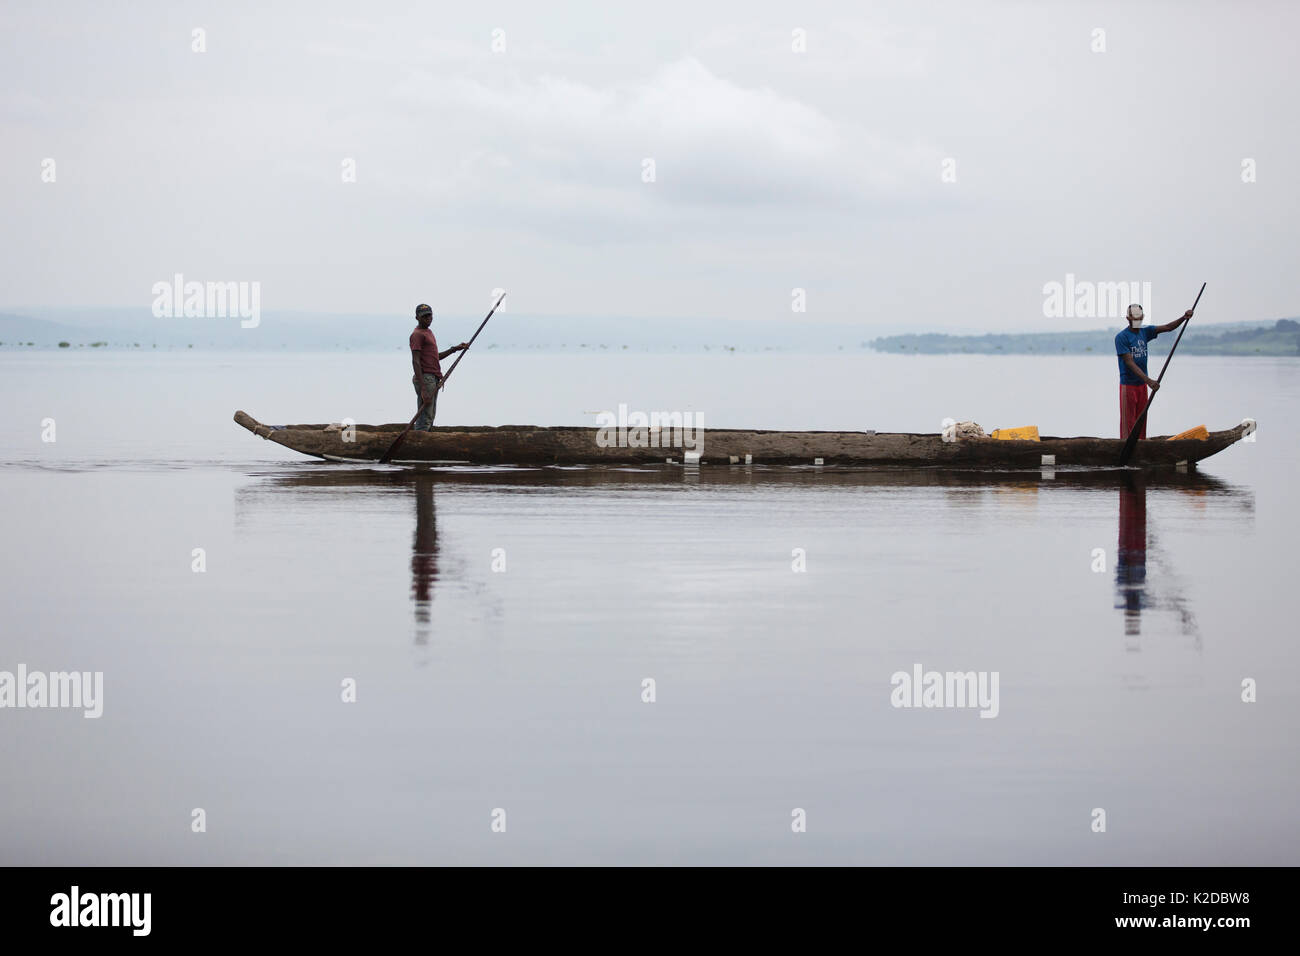 People crossing Congo river with goods to trade, the river is the border between Congo Brazzaville and Democratic Republic of Congo (DRC) Stock Photo